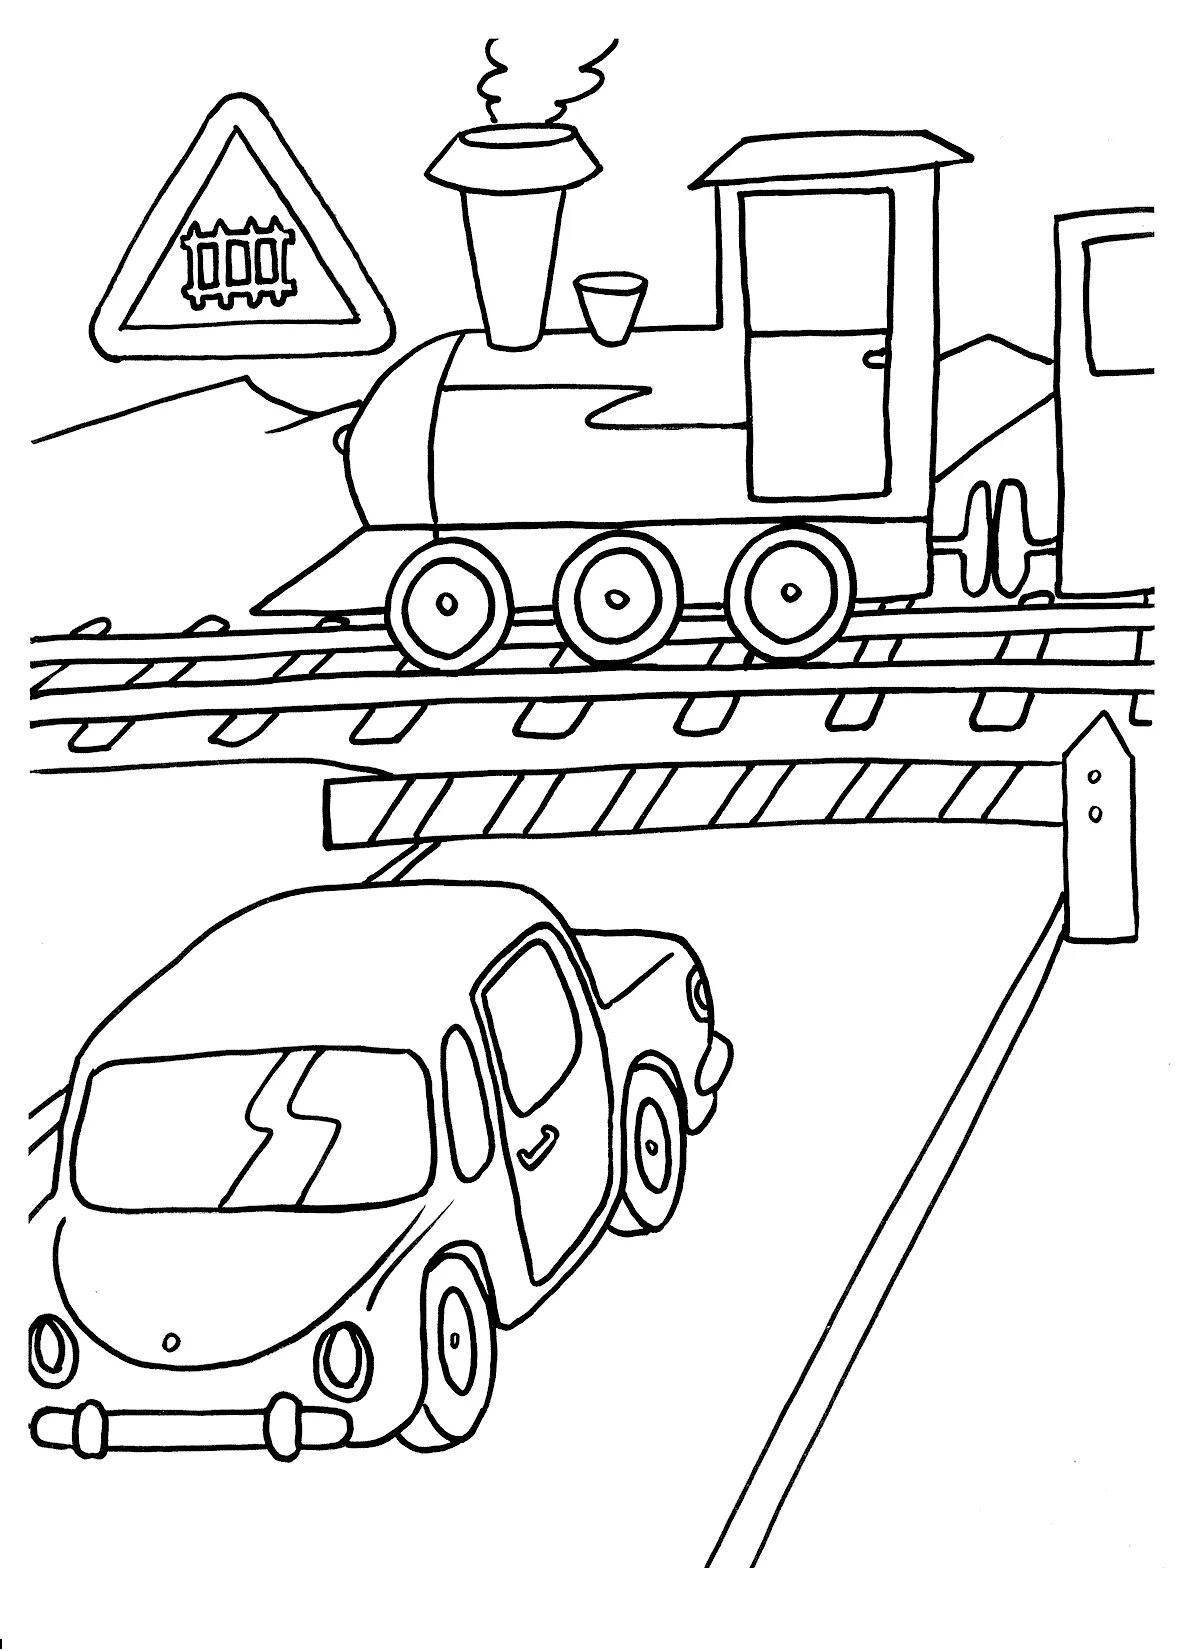 Railroad safety coloring page fun